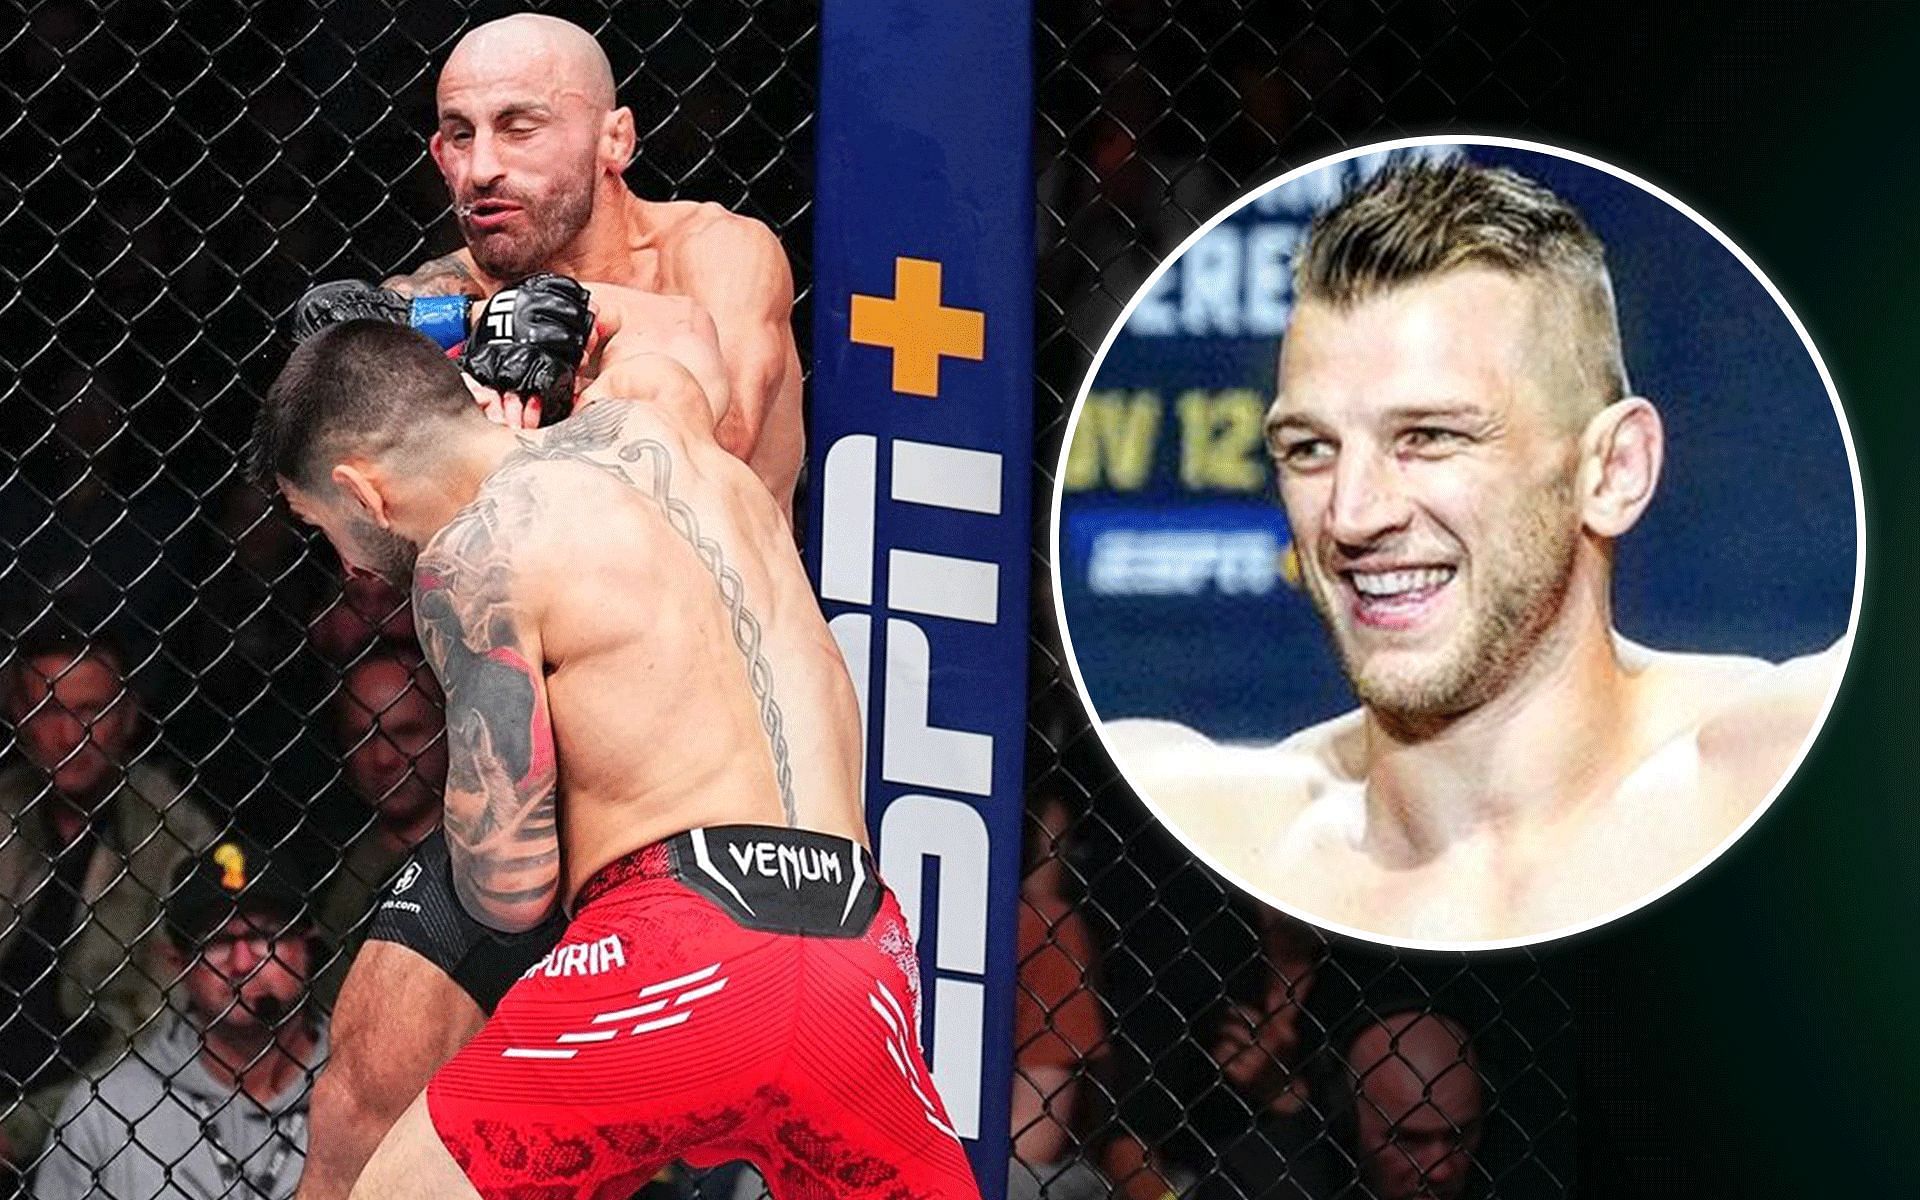 Dan Hooker (right) reacts to Alexander Volkanovski being knocked down by Ilia Topuria (left) [Image Via: @ufcindia and @danhangman on Instagram]